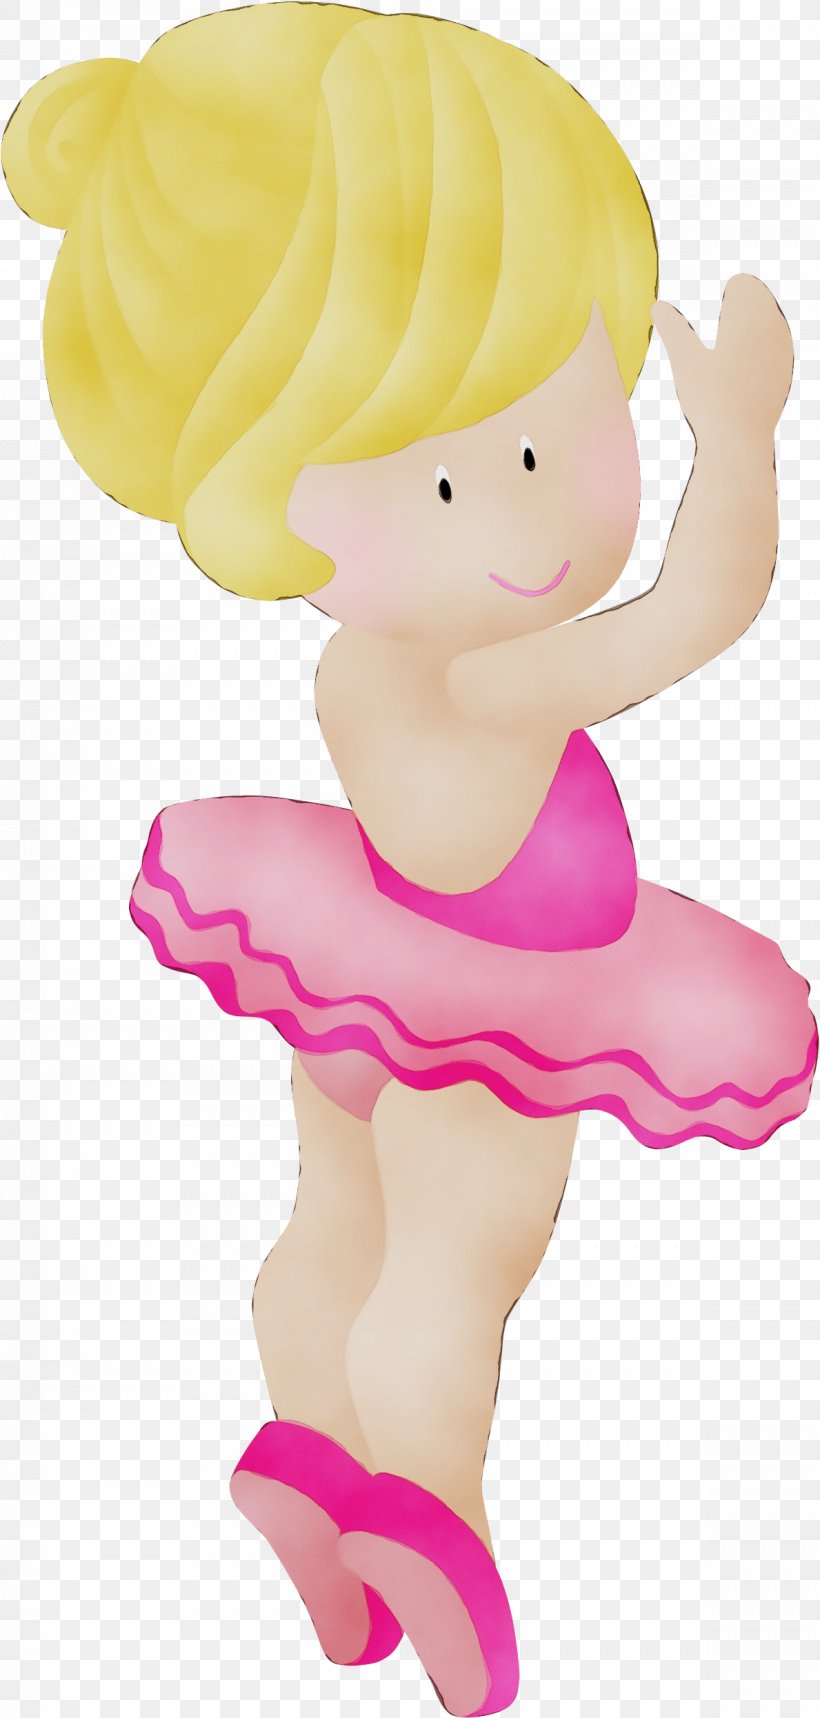 Cartoon Pink Clip Art Figurine Muscle, PNG, 1189x2492px, Watercolor, Animation, Cartoon, Figurine, Muscle Download Free